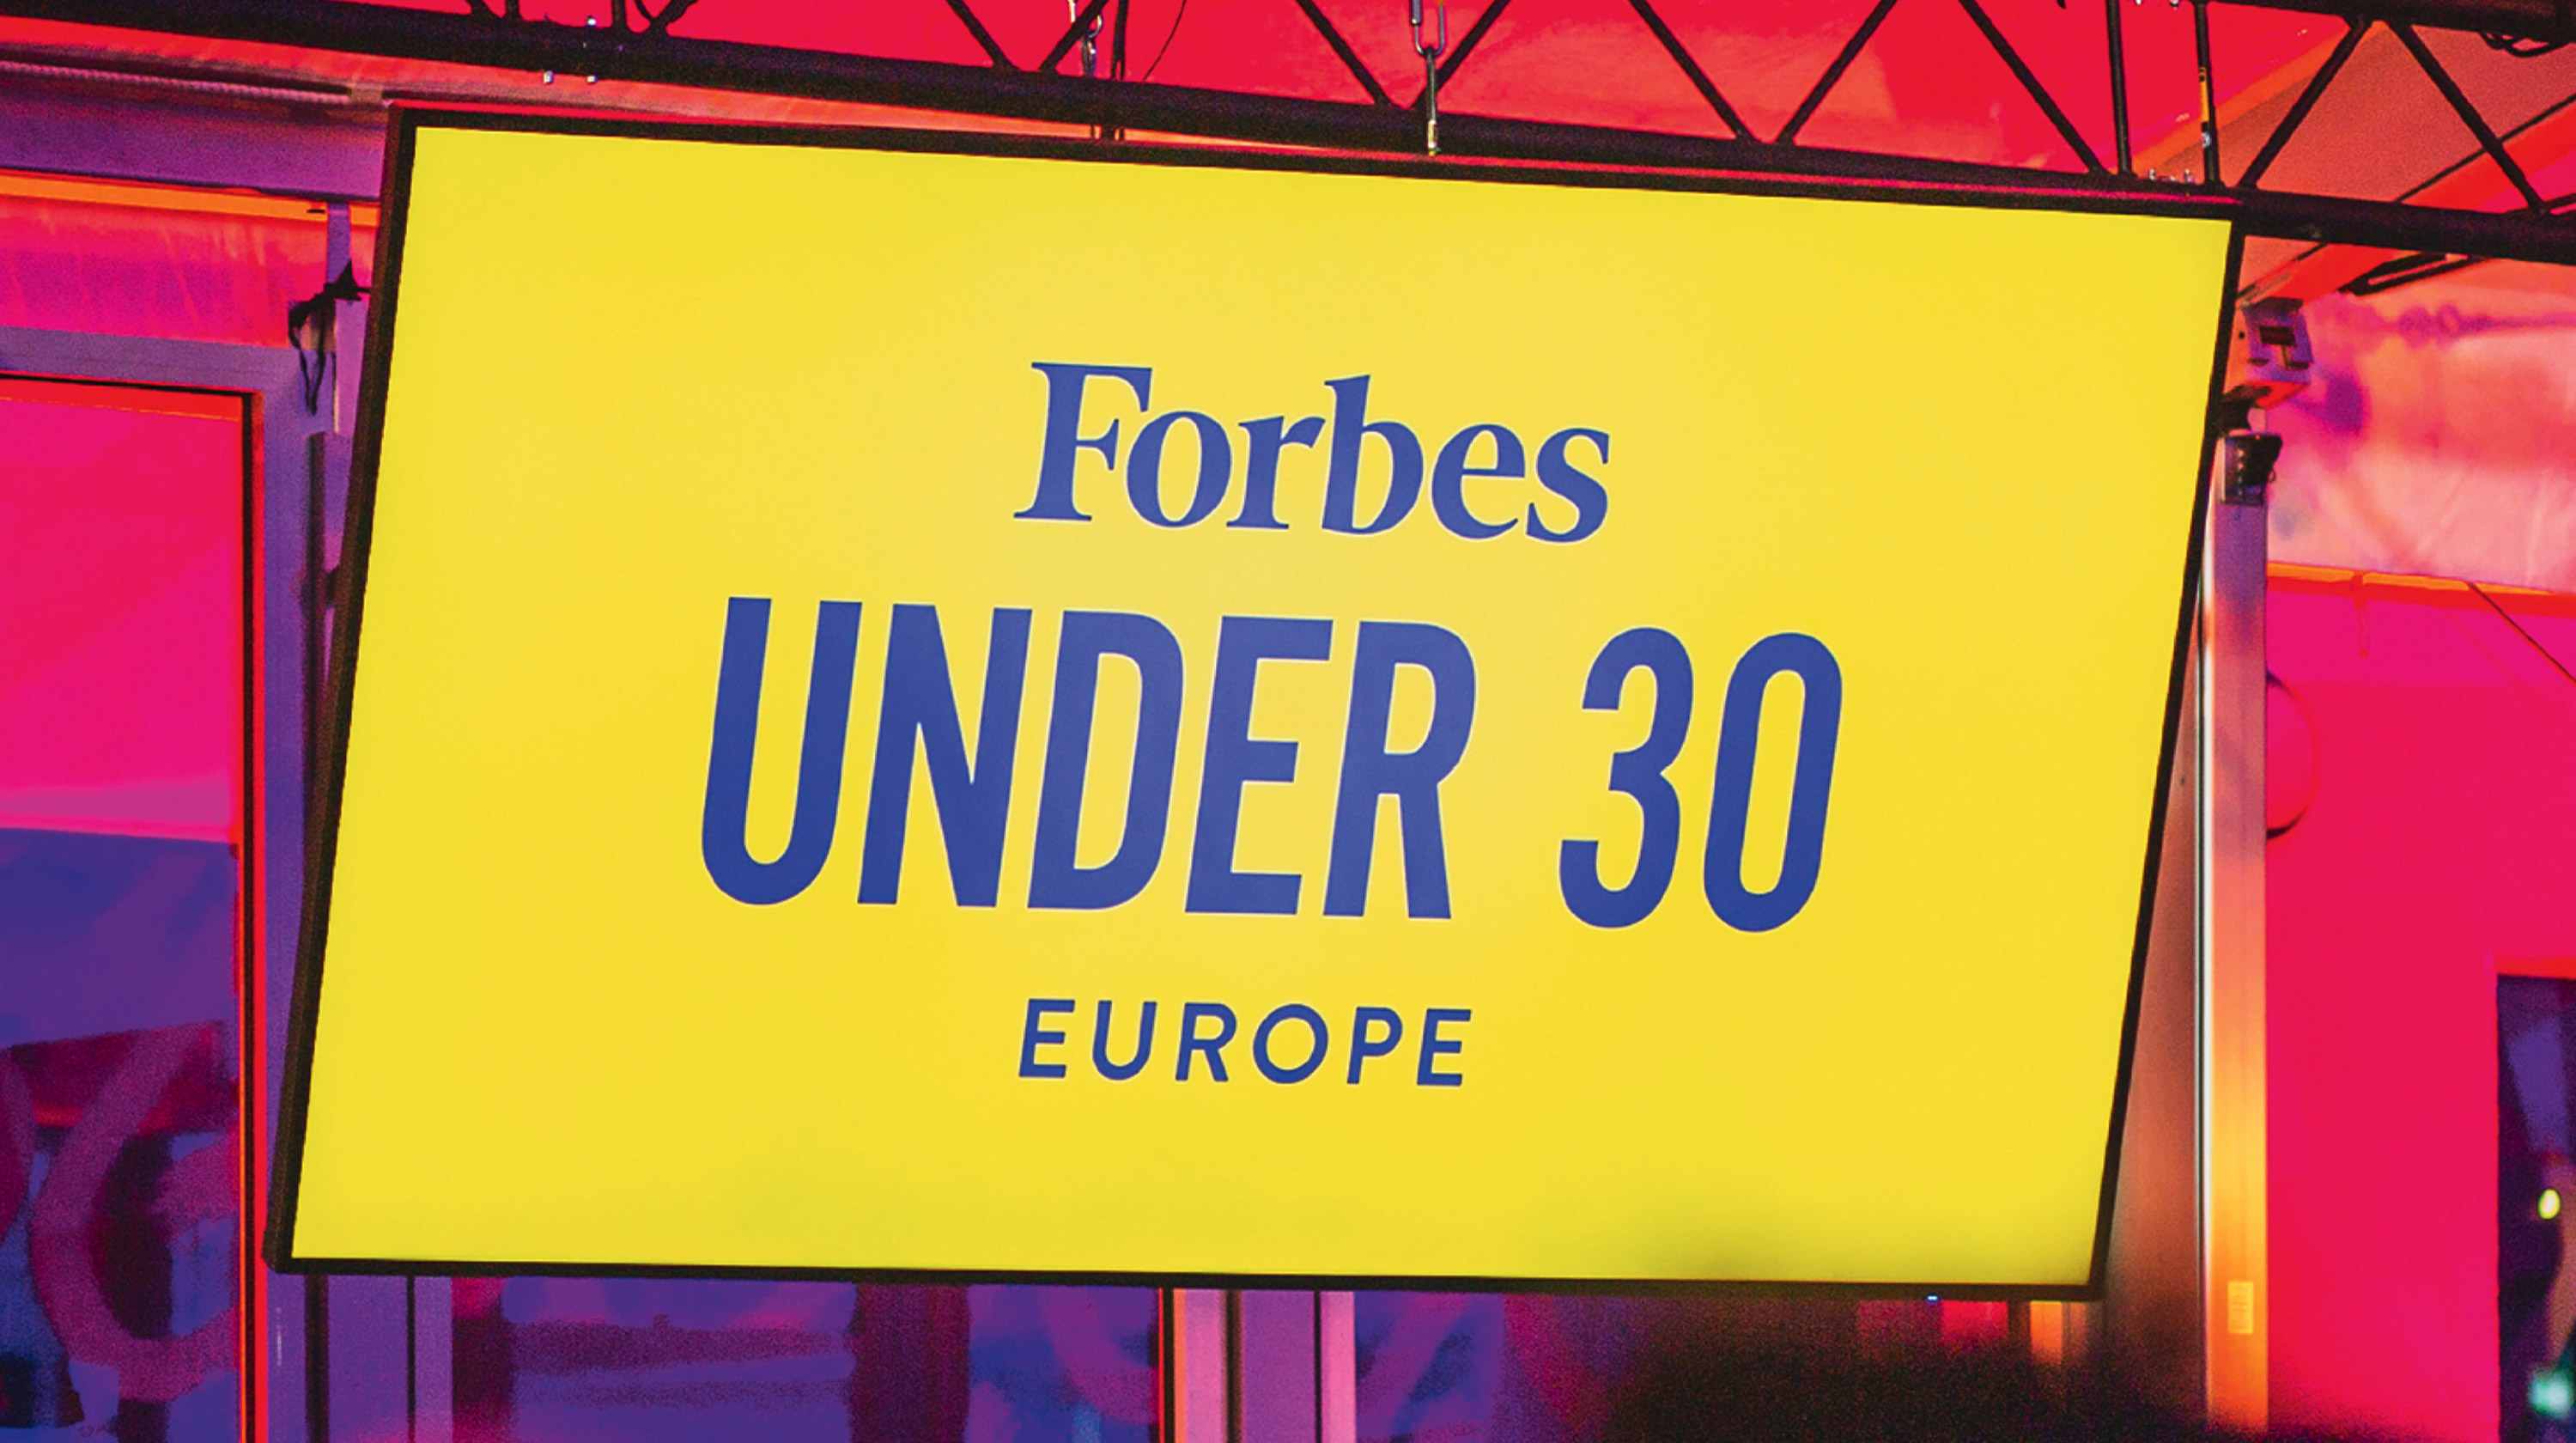 UNDER 30, AFTER 30 forbes.swiss